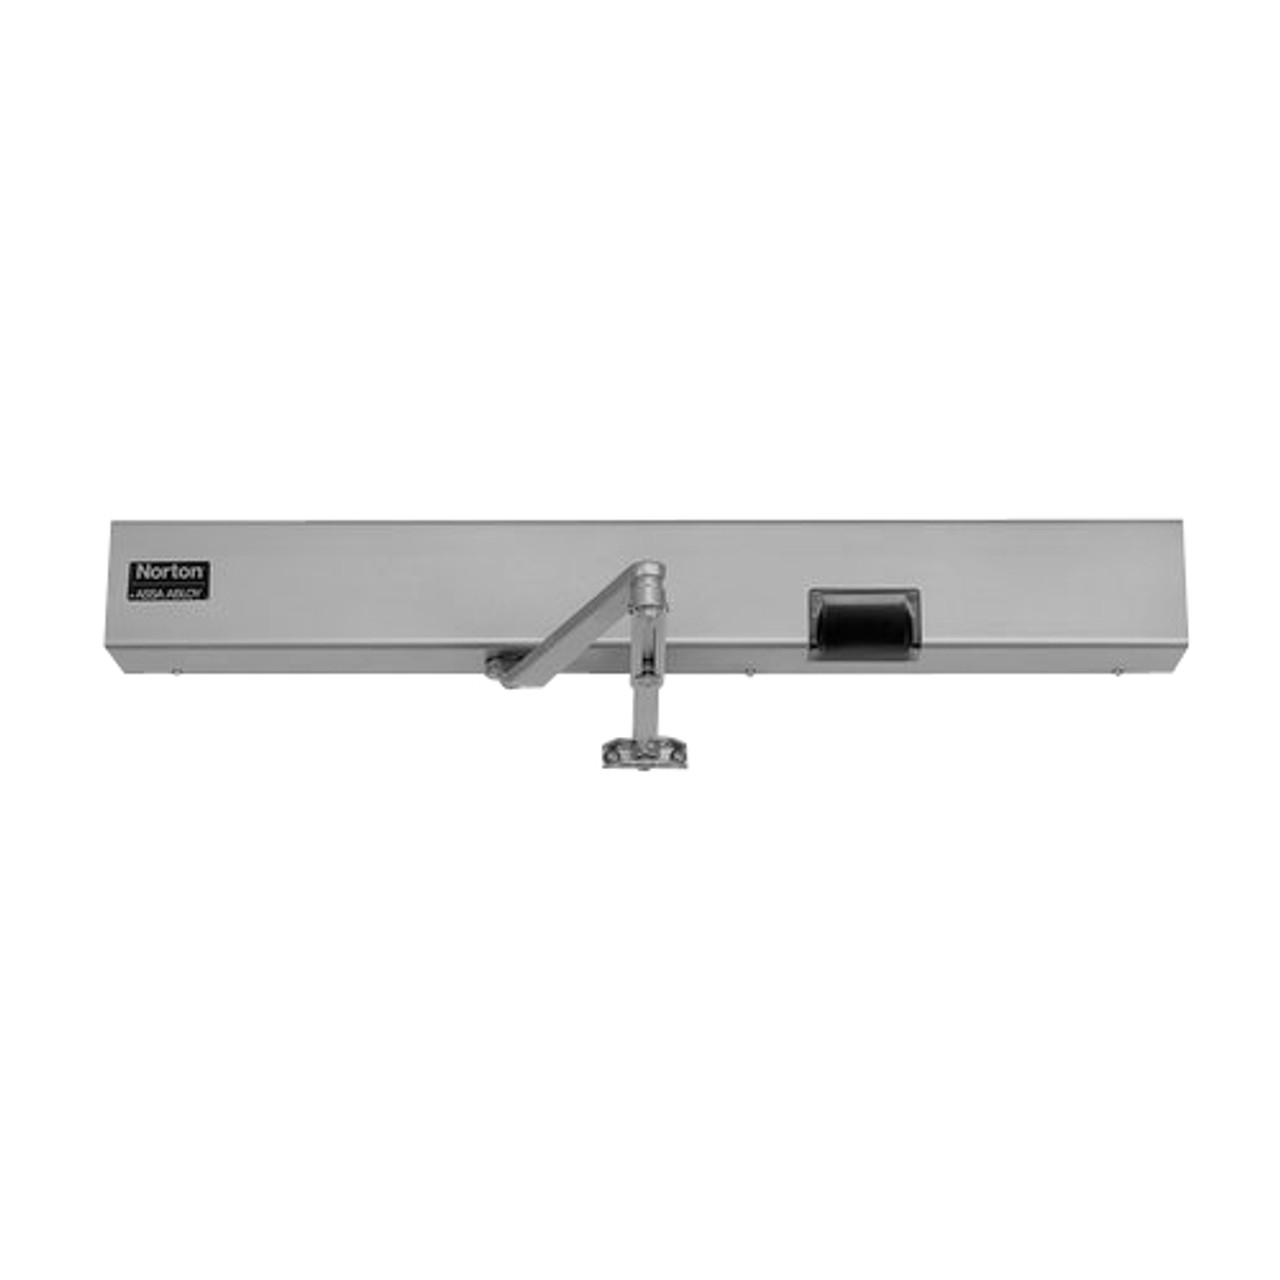 7135SZ-DZ-RH-120VAC-689 Norton 7100SZ Series Safe Zone Multi-Point Closer/Holder with Motion Sensor and Push Side Double Lever 13-1/2 inch Main Arm in Aluminum Finish